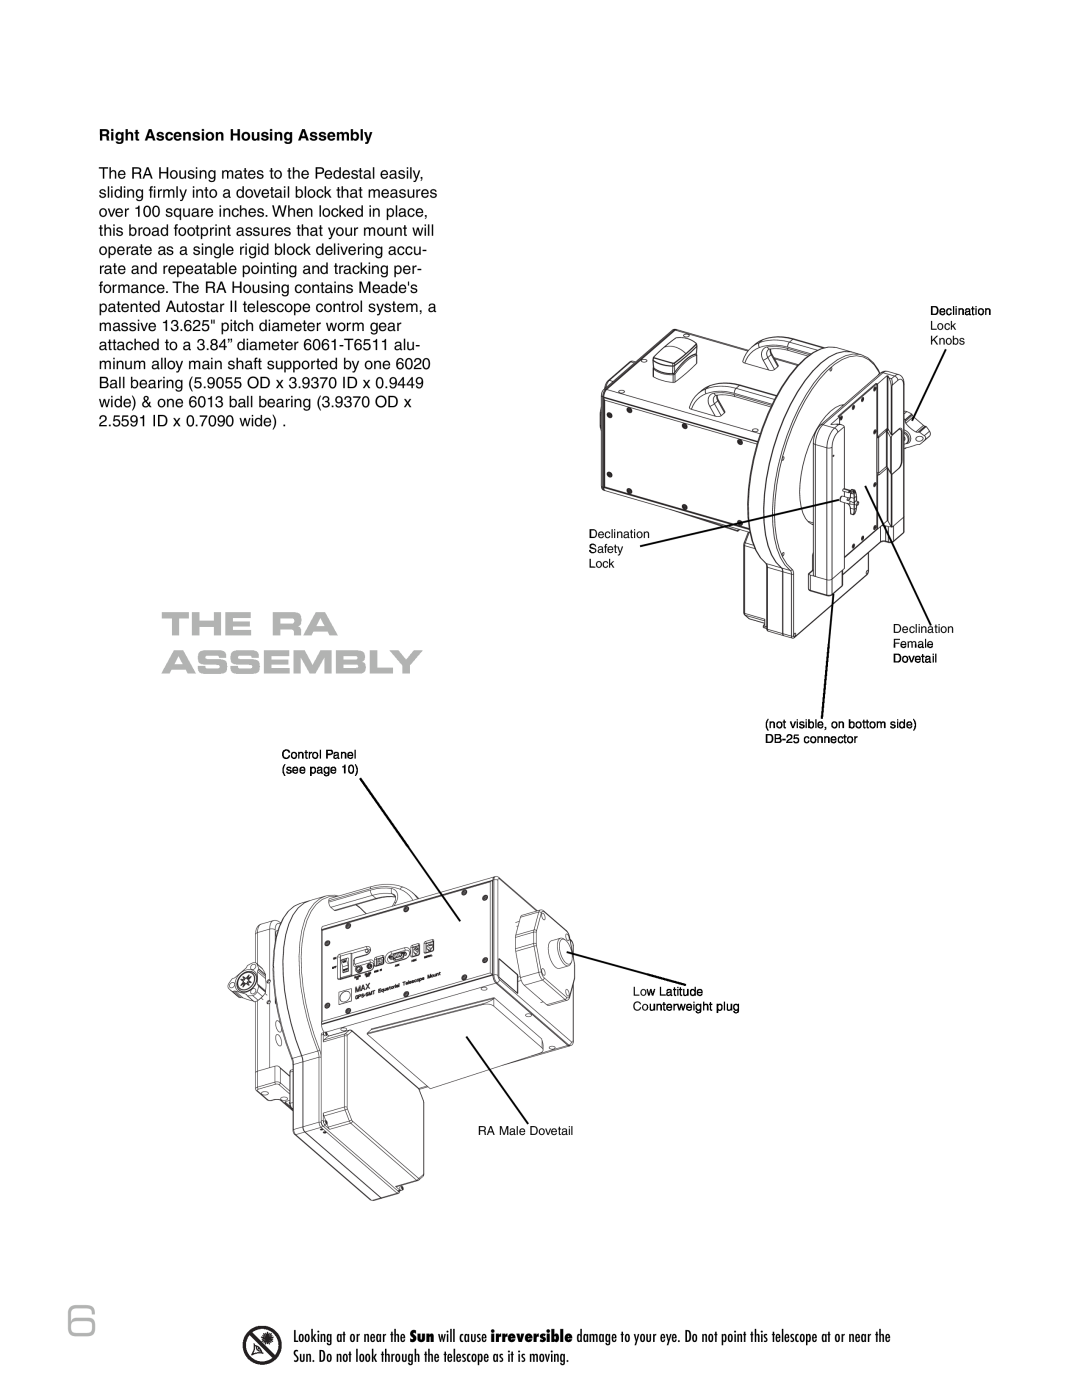 Meade RCX400 instruction manual The Ra Assembly, Right Ascension Housing Assembly 